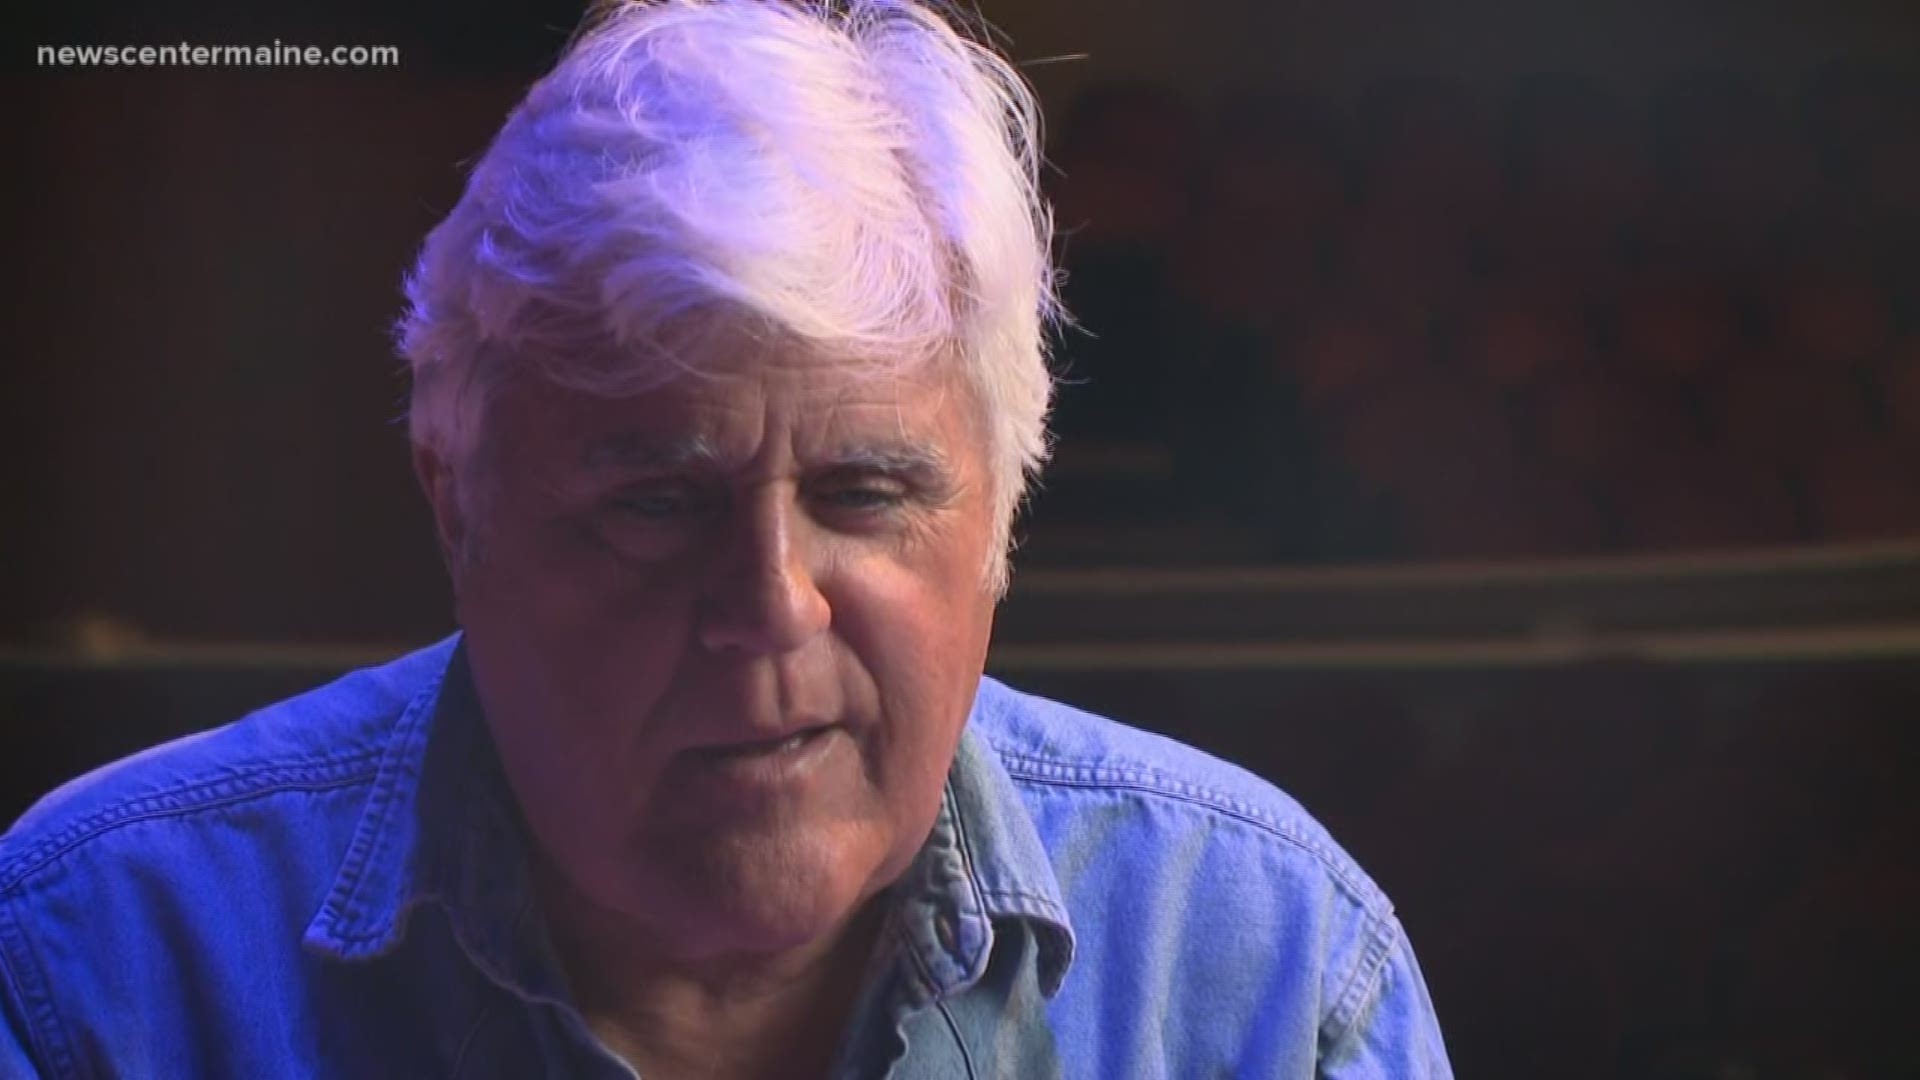 Quick questions and quick answers with Jay Leno when he was in Maine.